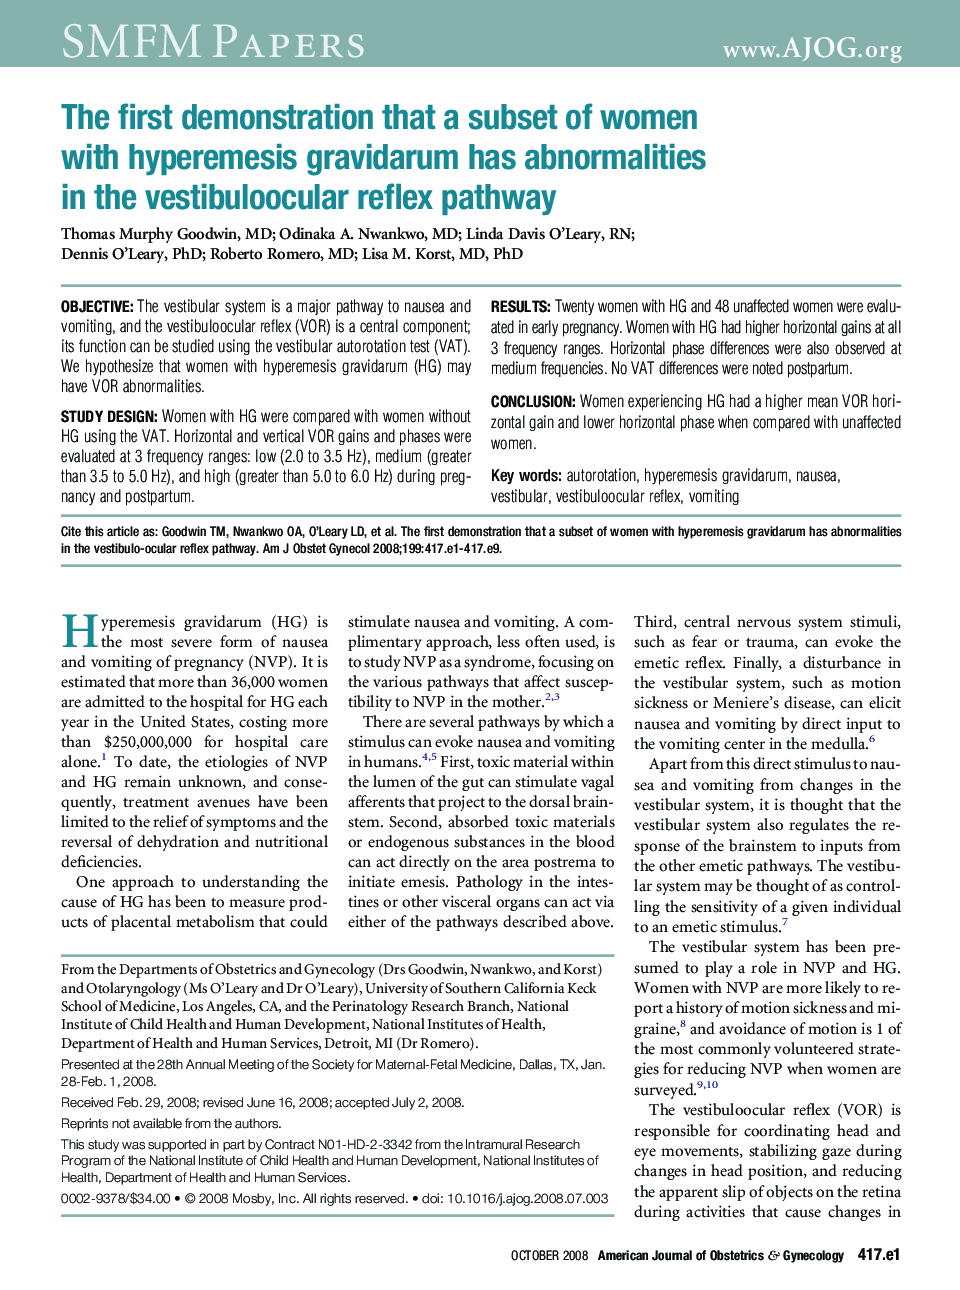 The first demonstration that a subset of women with hyperemesis gravidarum has abnormalities in the vestibuloocular reflex pathway